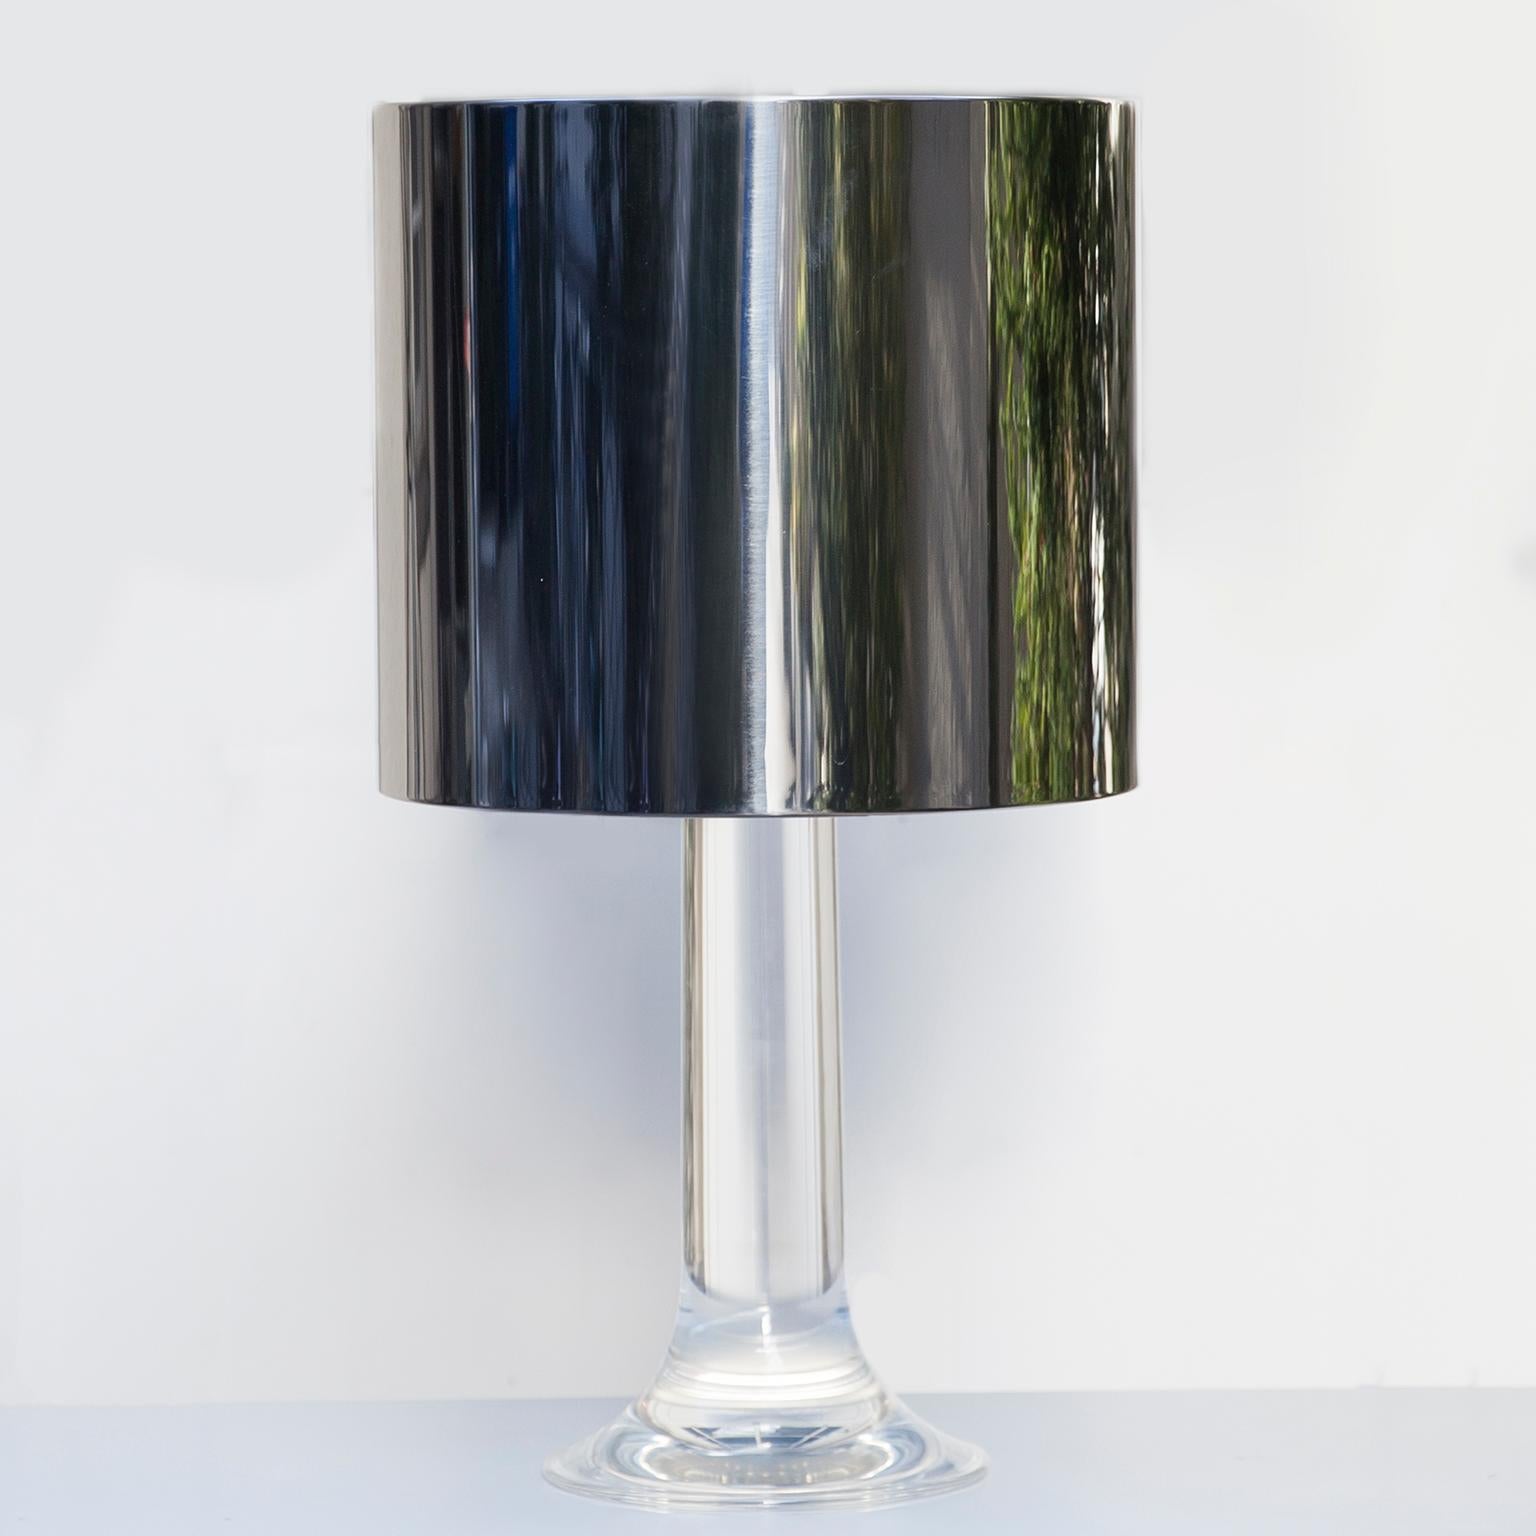 Italian table lamp by Harvey Guzzini, 1970. Lucite base and a polished steel shade. One-light above and three below. Fantastic light.